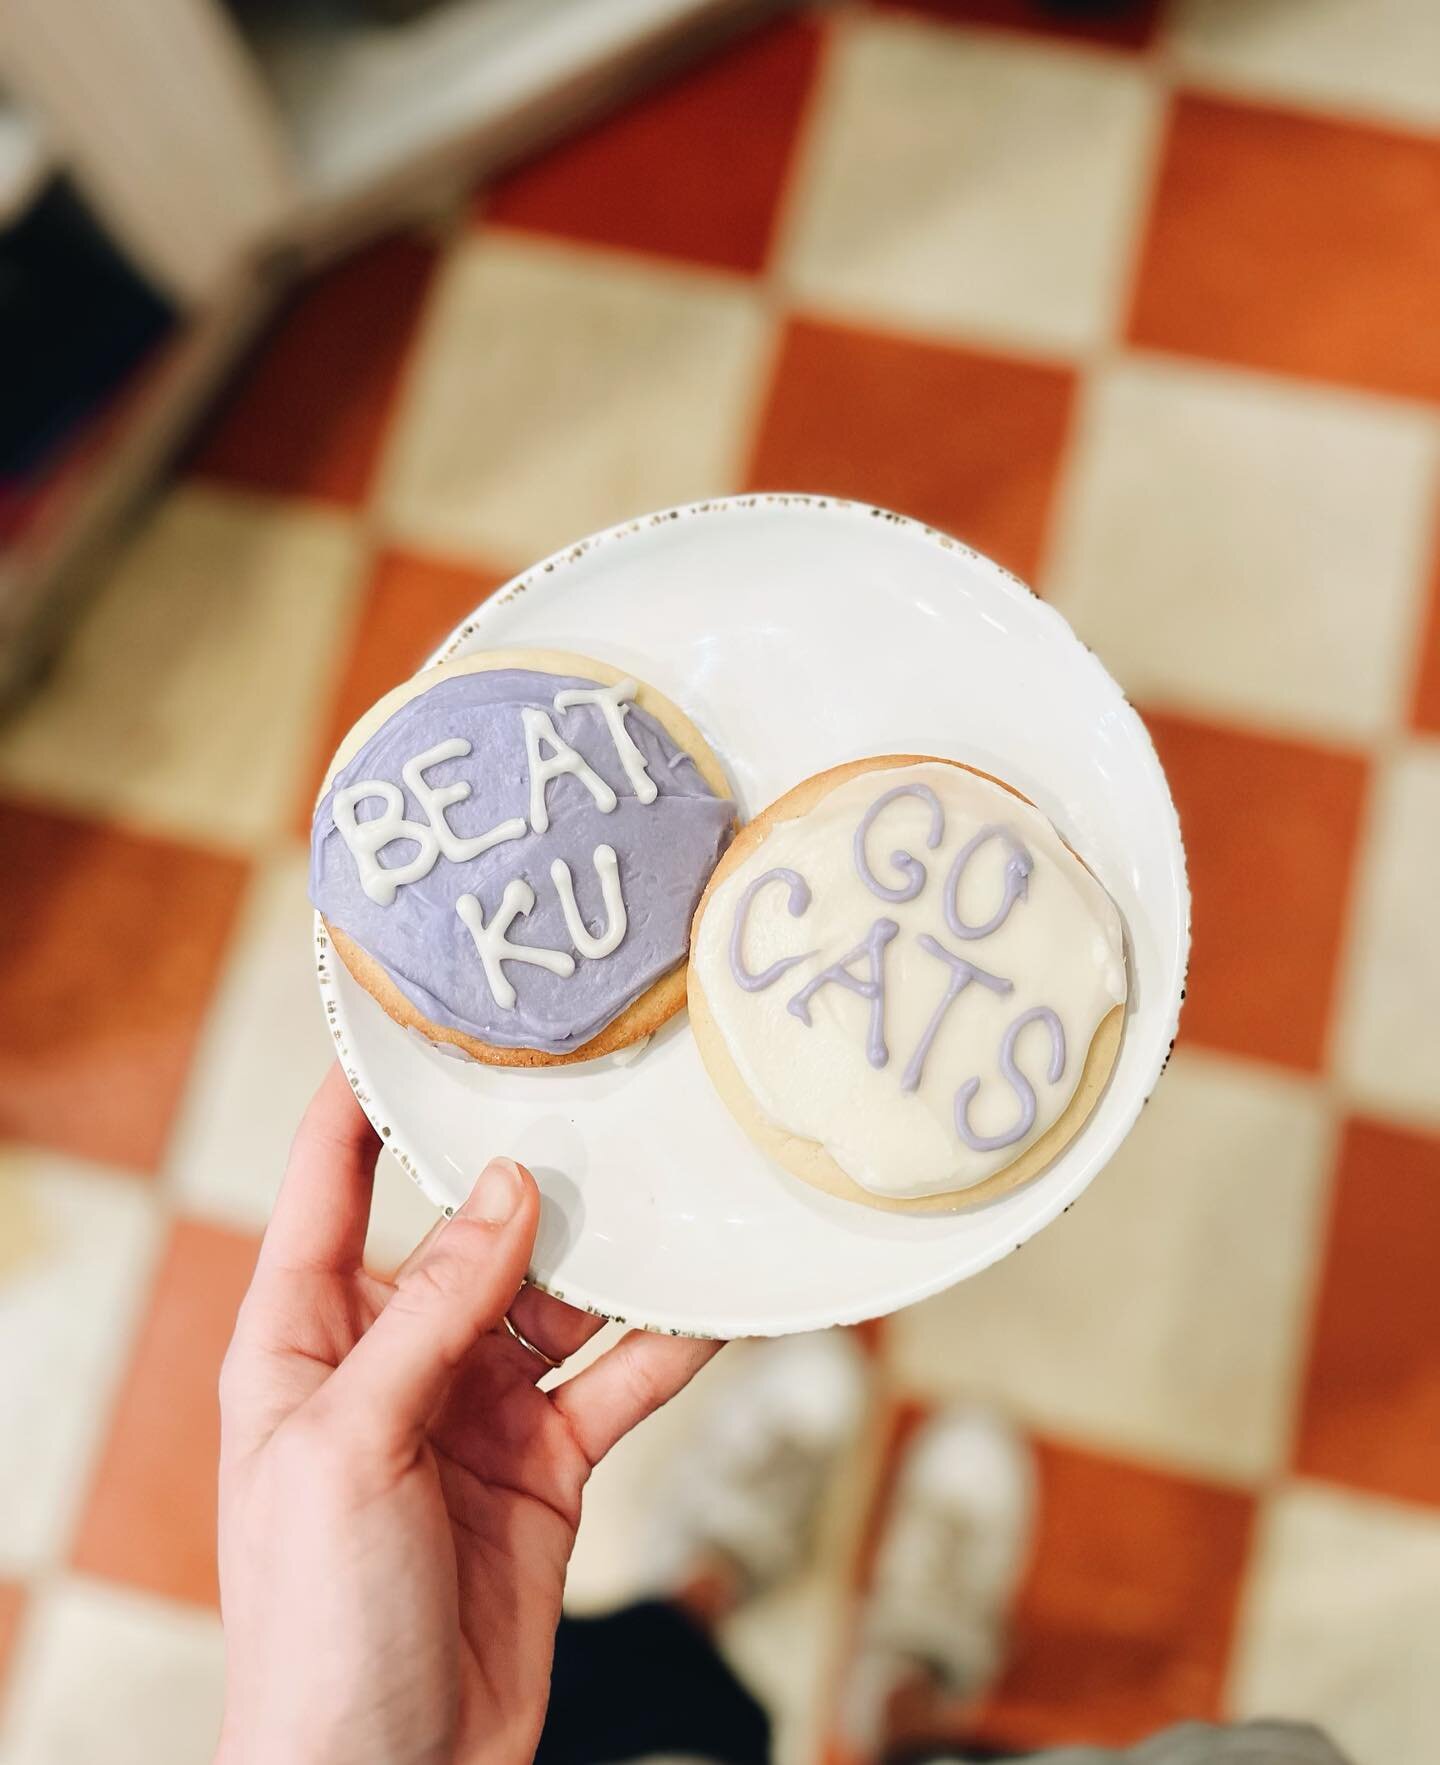 Today is kind of a big day in MHK.😉

Come swing by for some game day cookies!